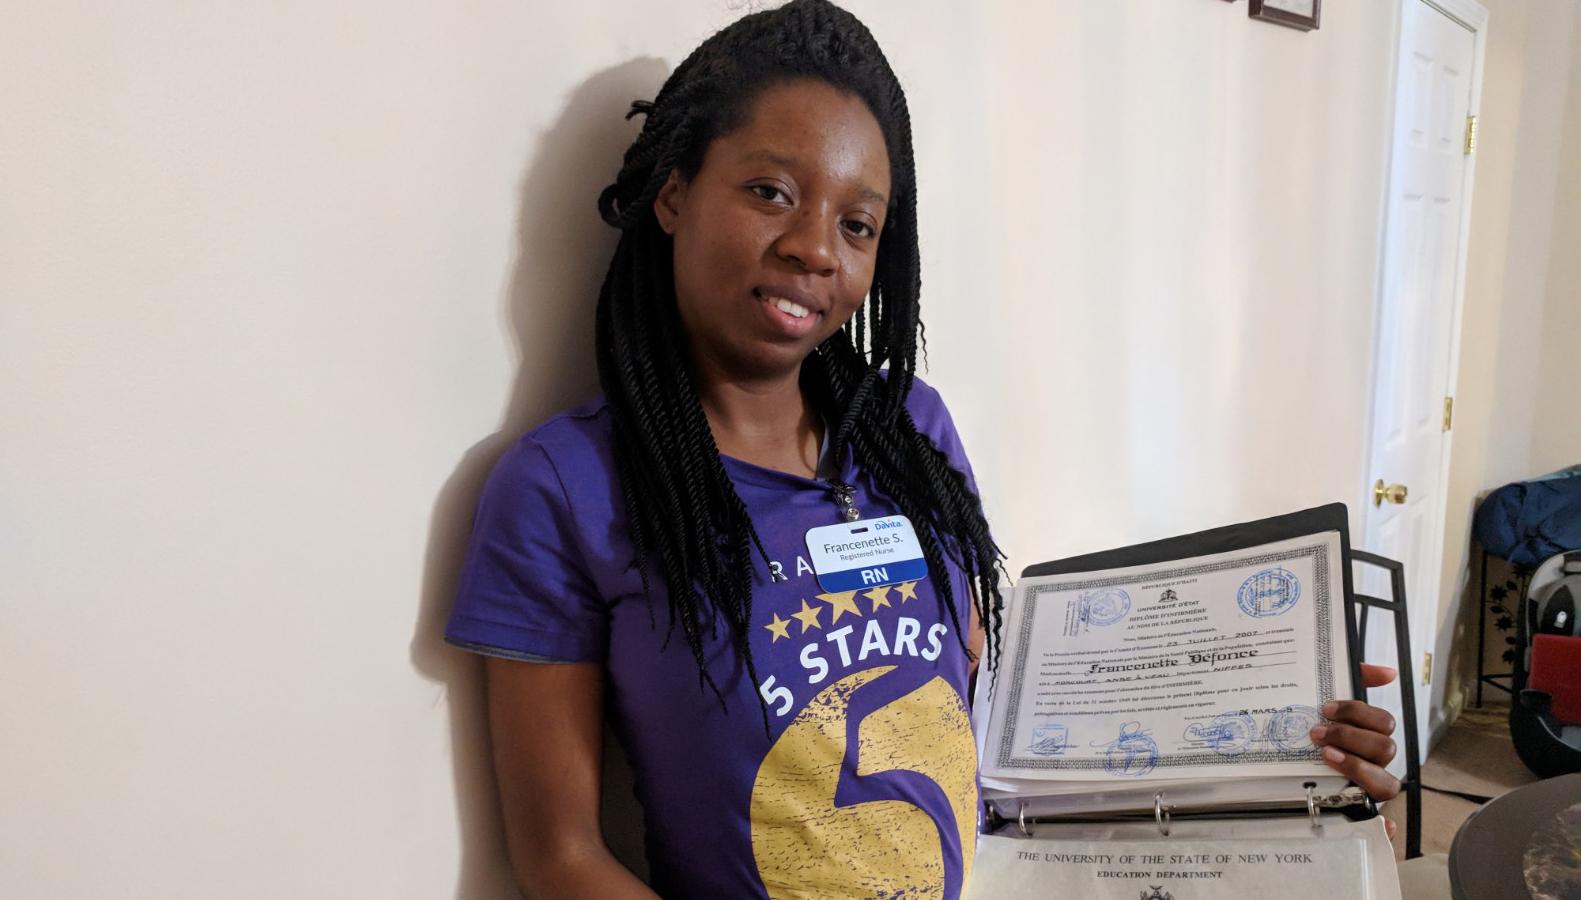 Woman against white wall holding up certificate that shows nursing credentials